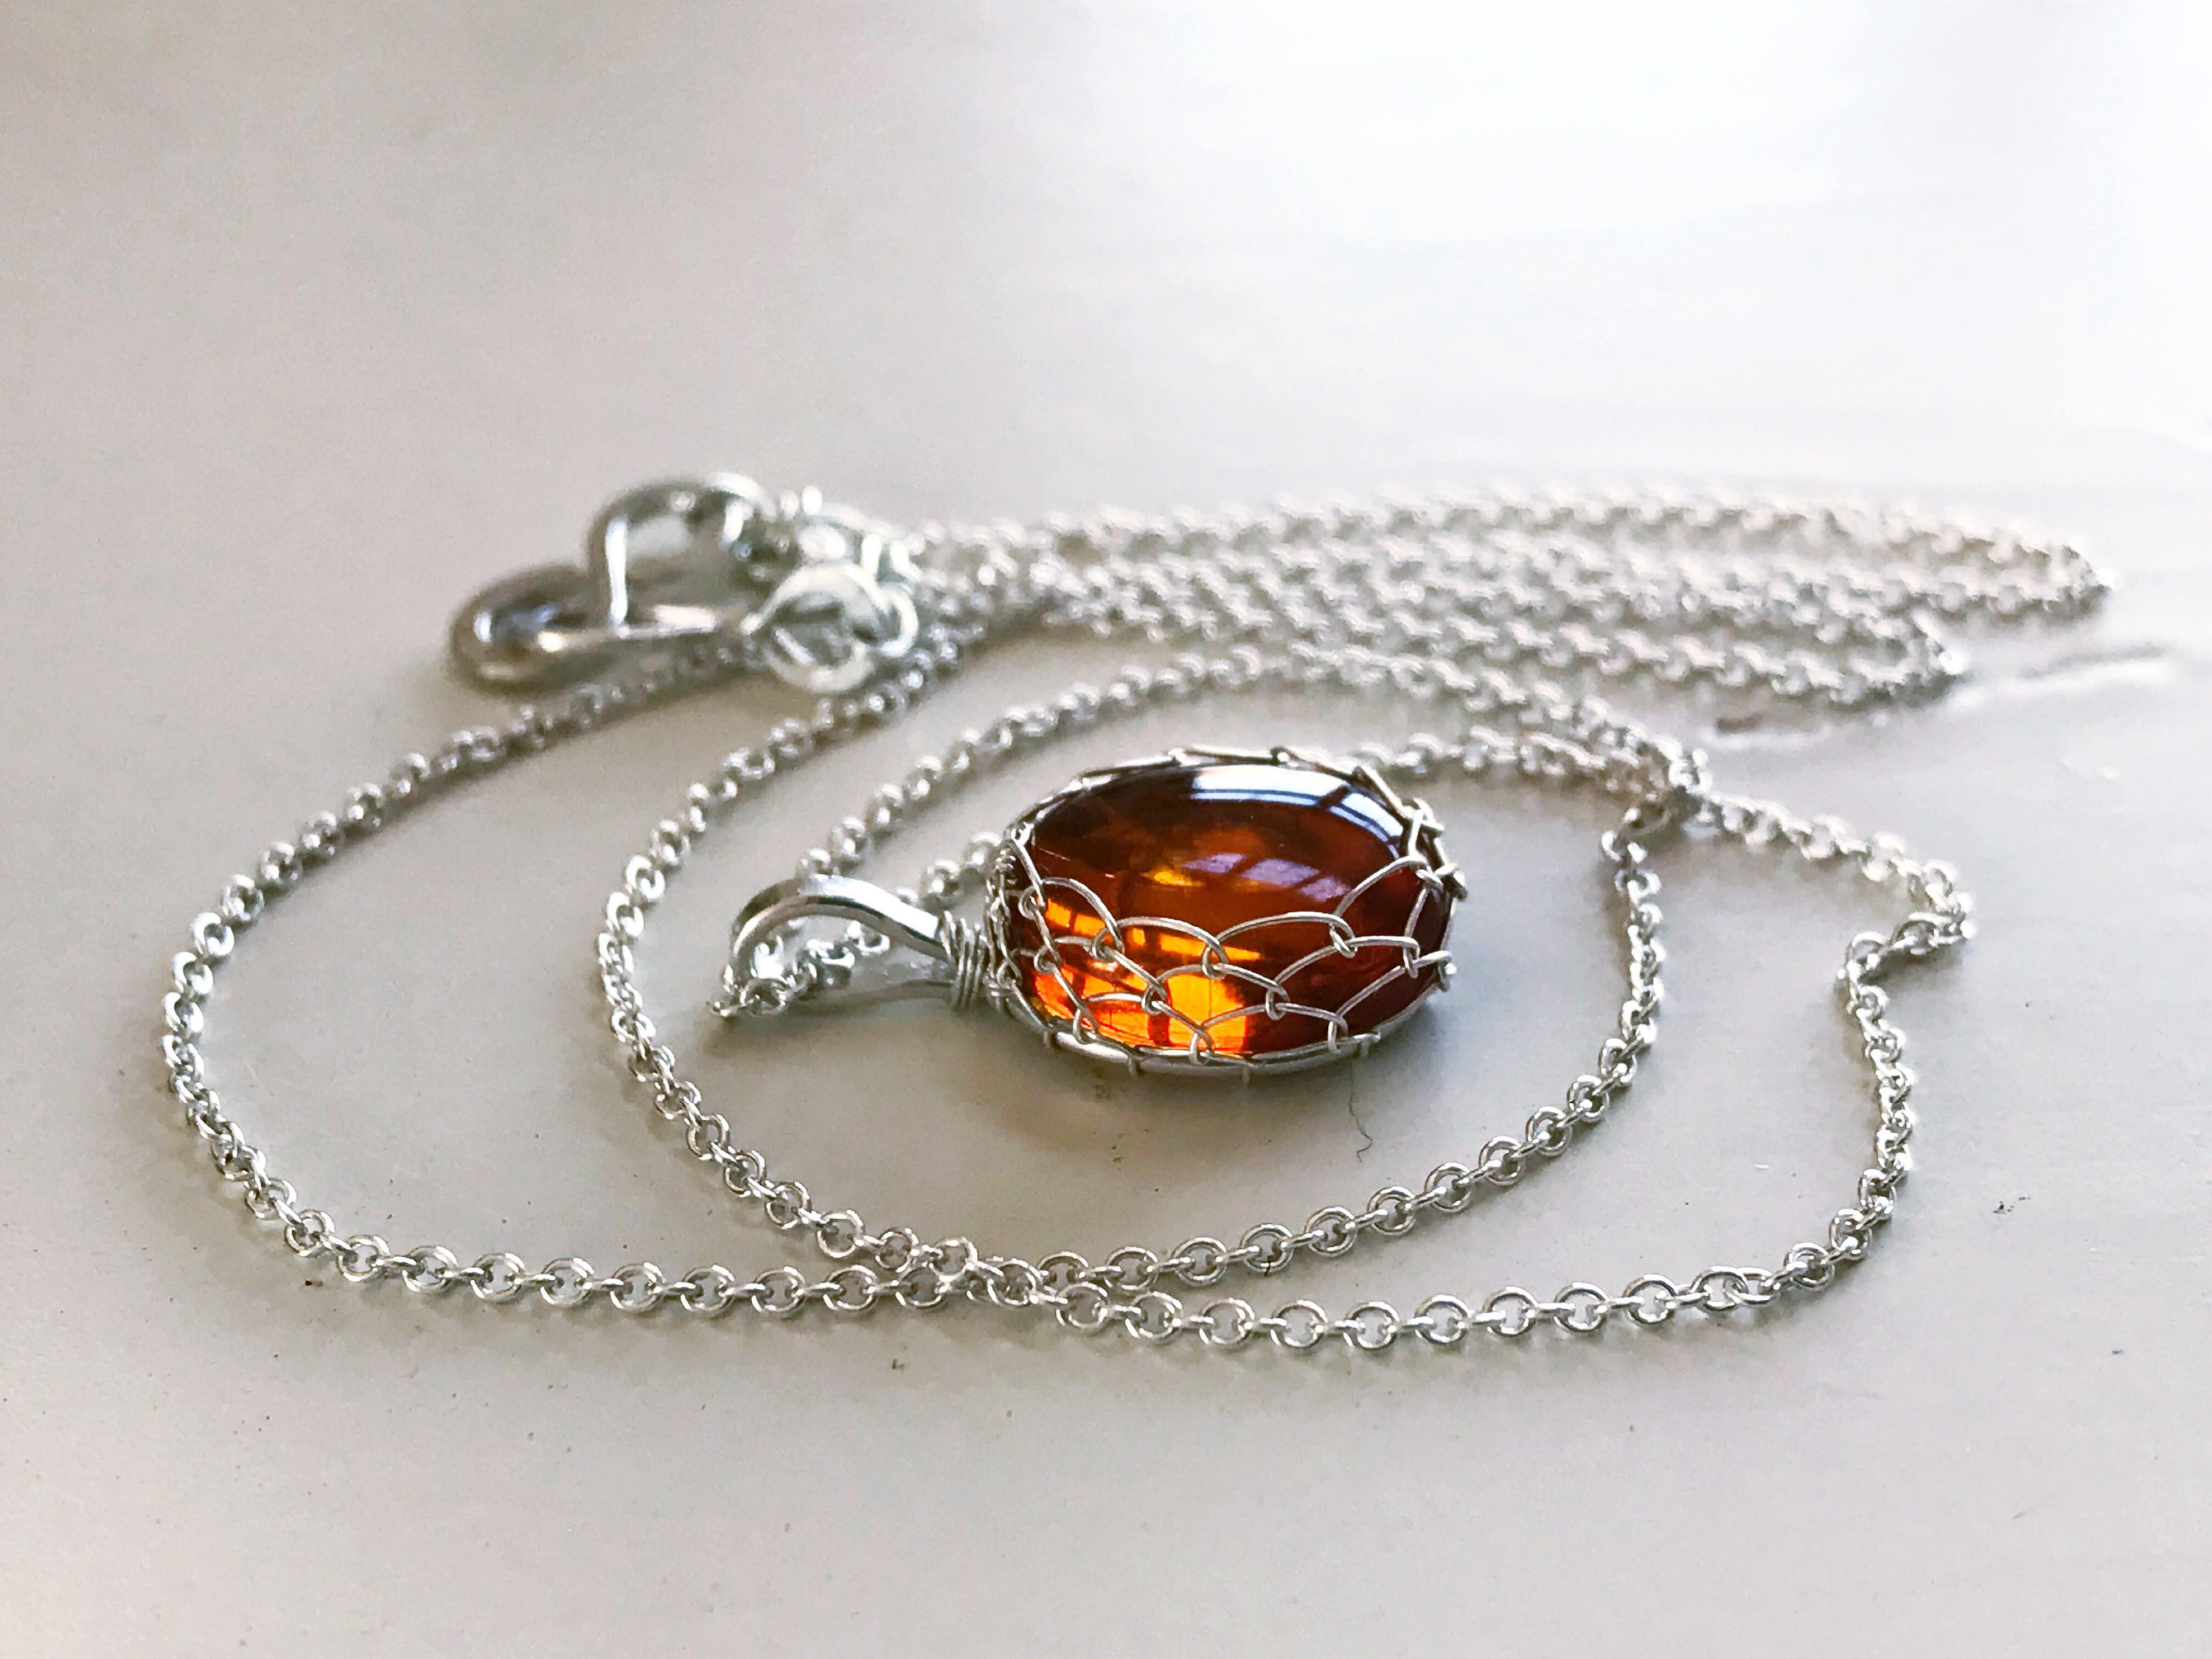 Embers Chain and Dichroic Pendant Necklace Shimmering in Ambers and Oranges